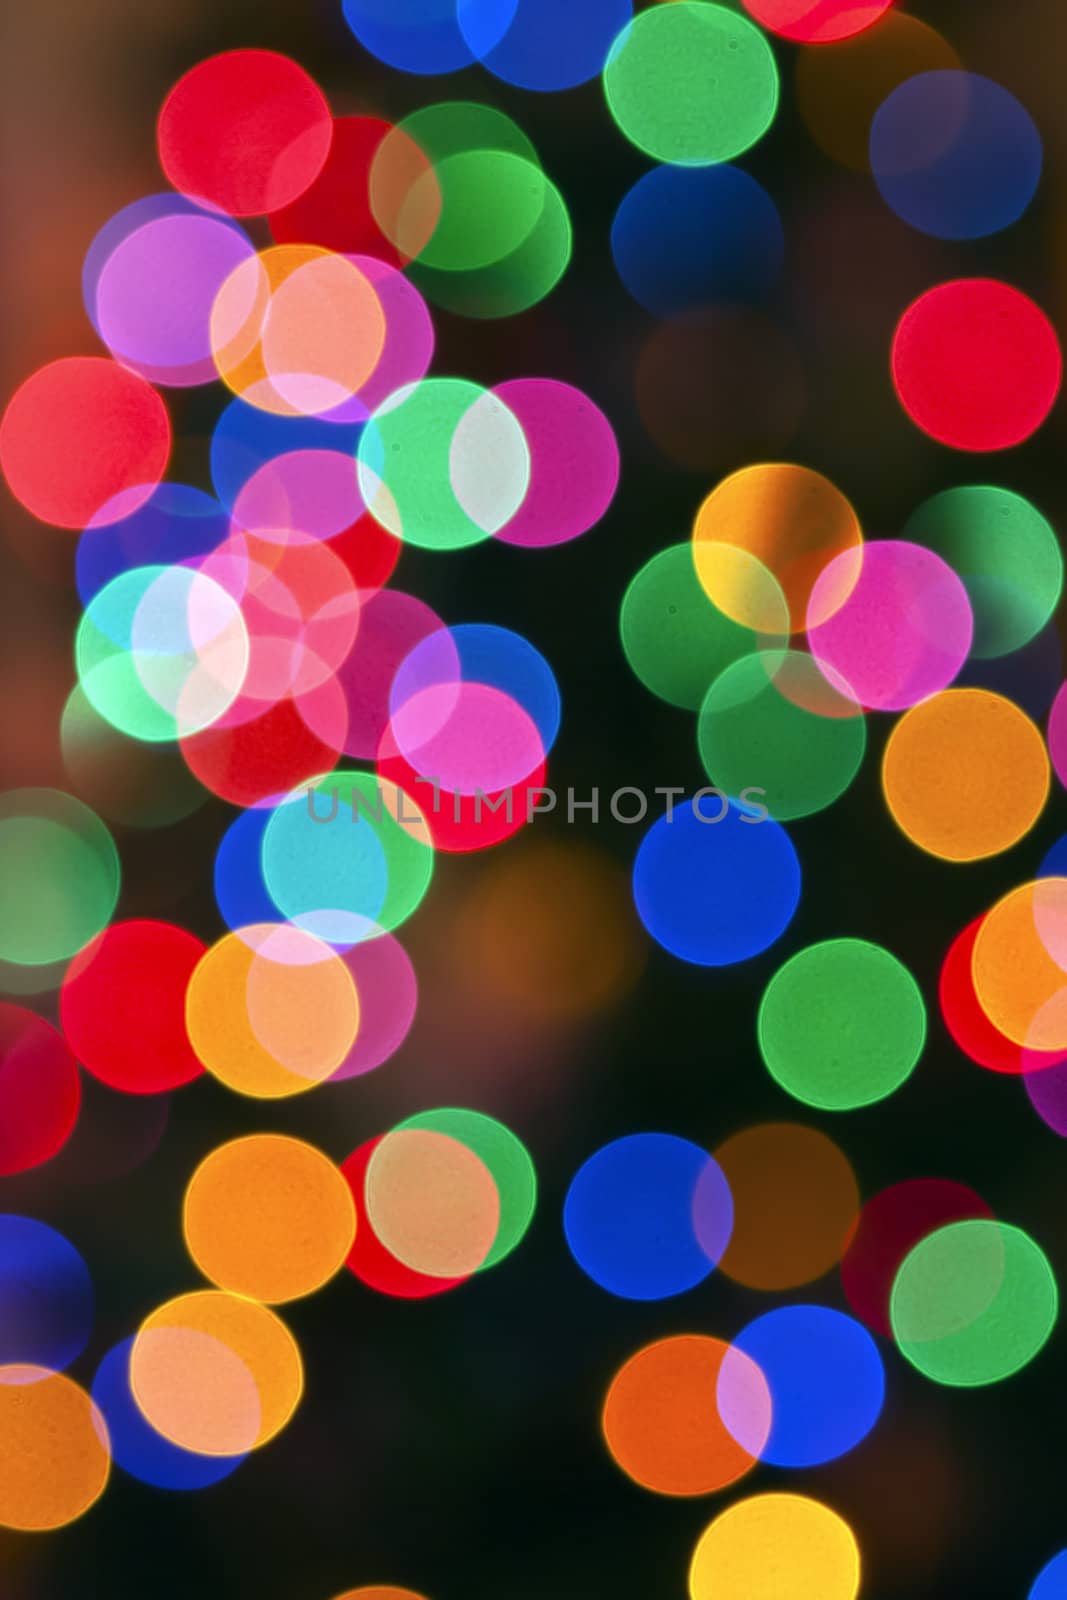 Glowing Christmas lights background in abstract image.